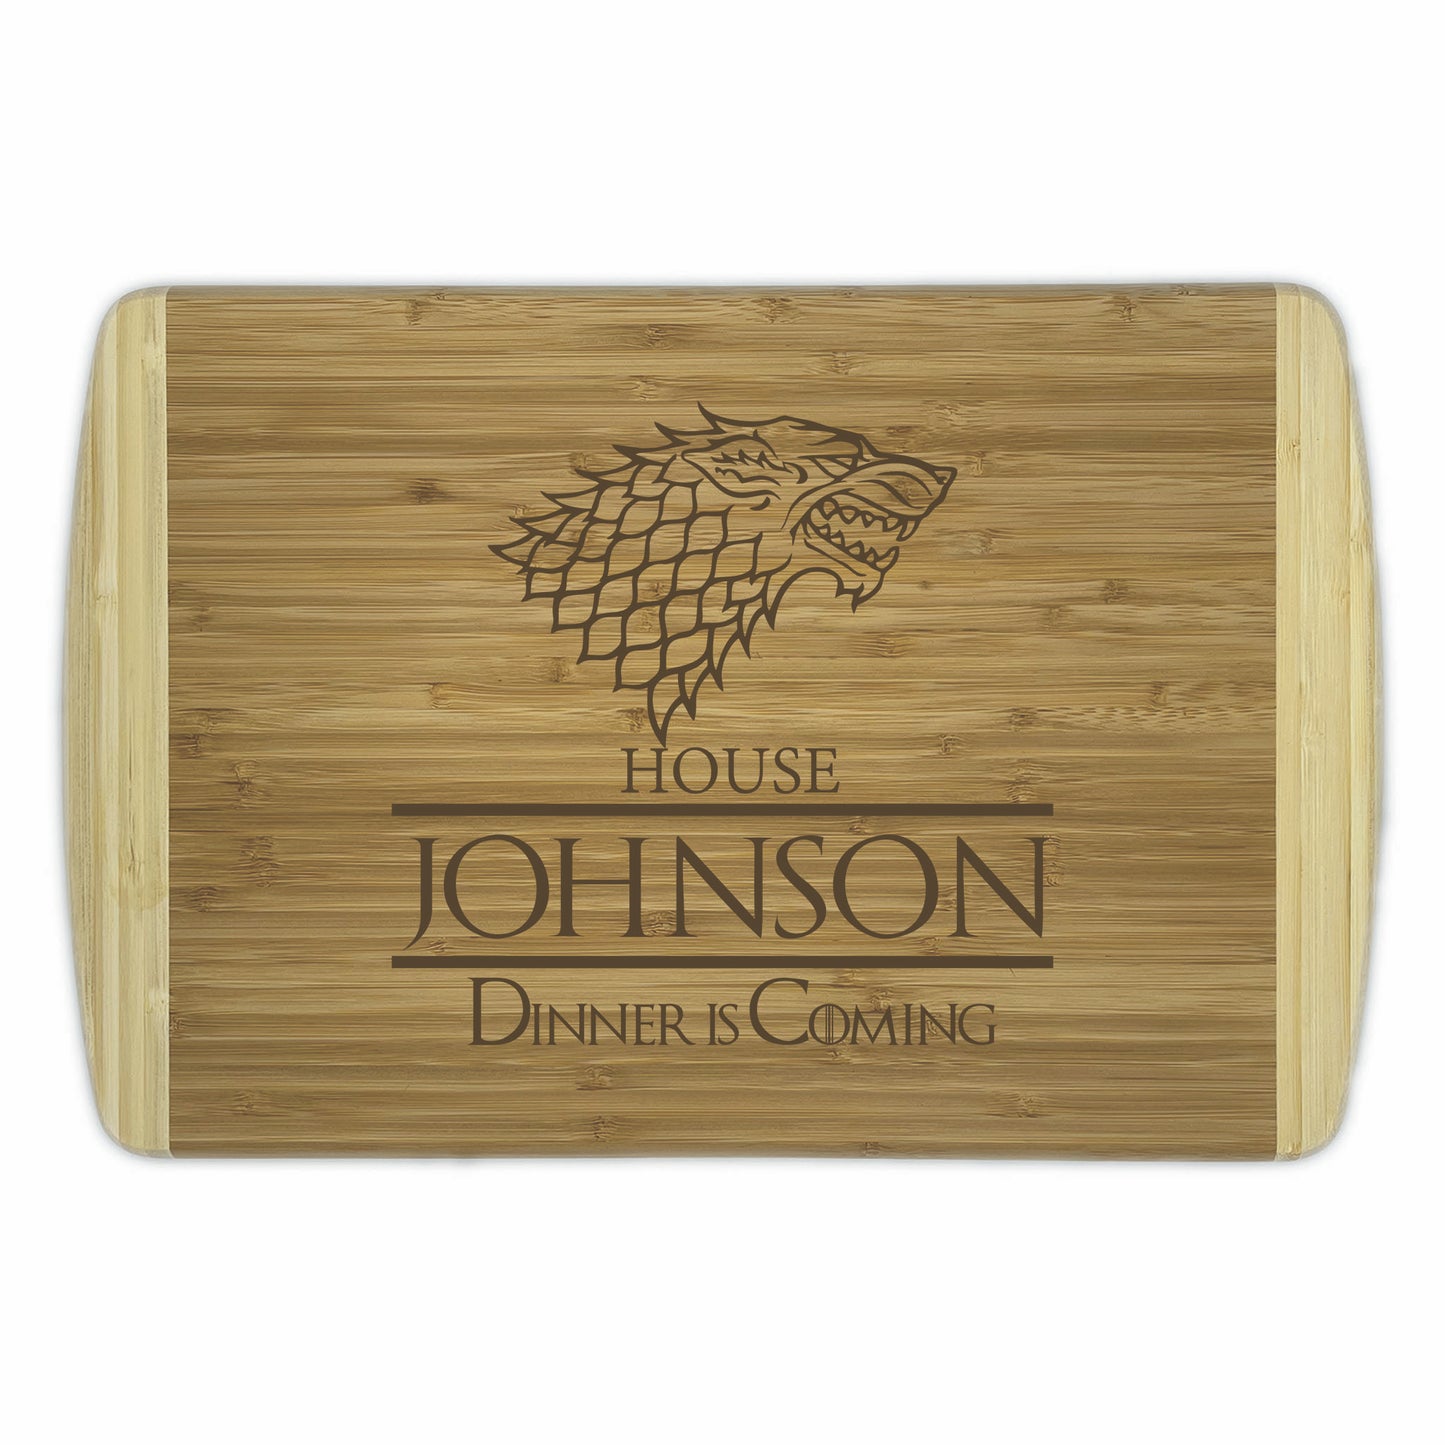 Game of Thrones Bamboo Cutting Boards | Personalized Dinner is Coming Wood Cutting Boards | Different Styles Available